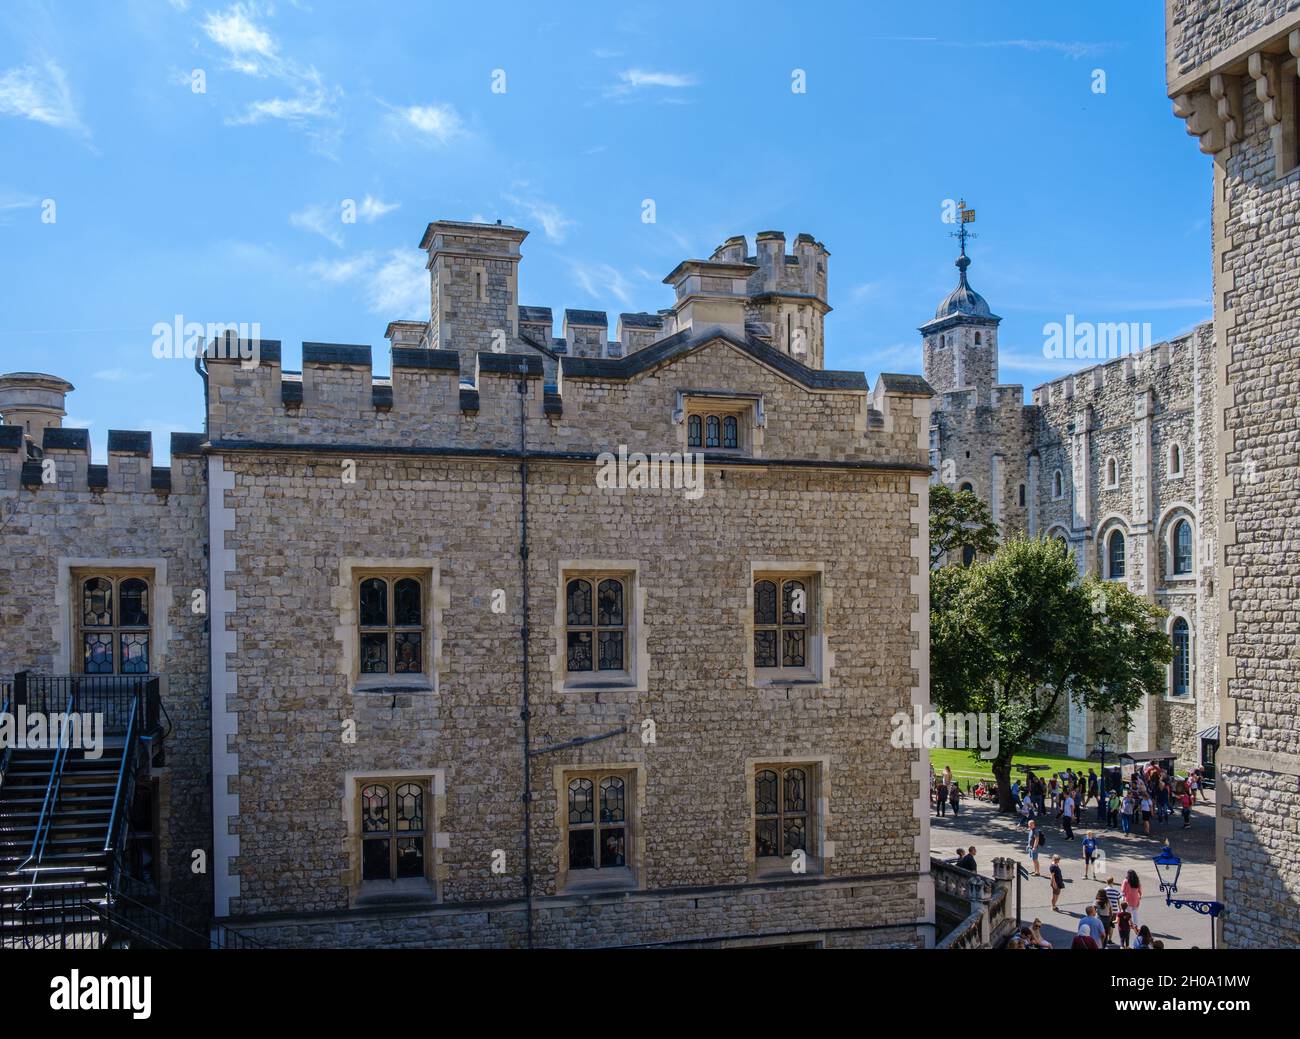 The Headquarters of Fusiliers at the Tower of London houses the Regimental Headquarters, Officers' Mess and a museum open to the public. Stock Photo